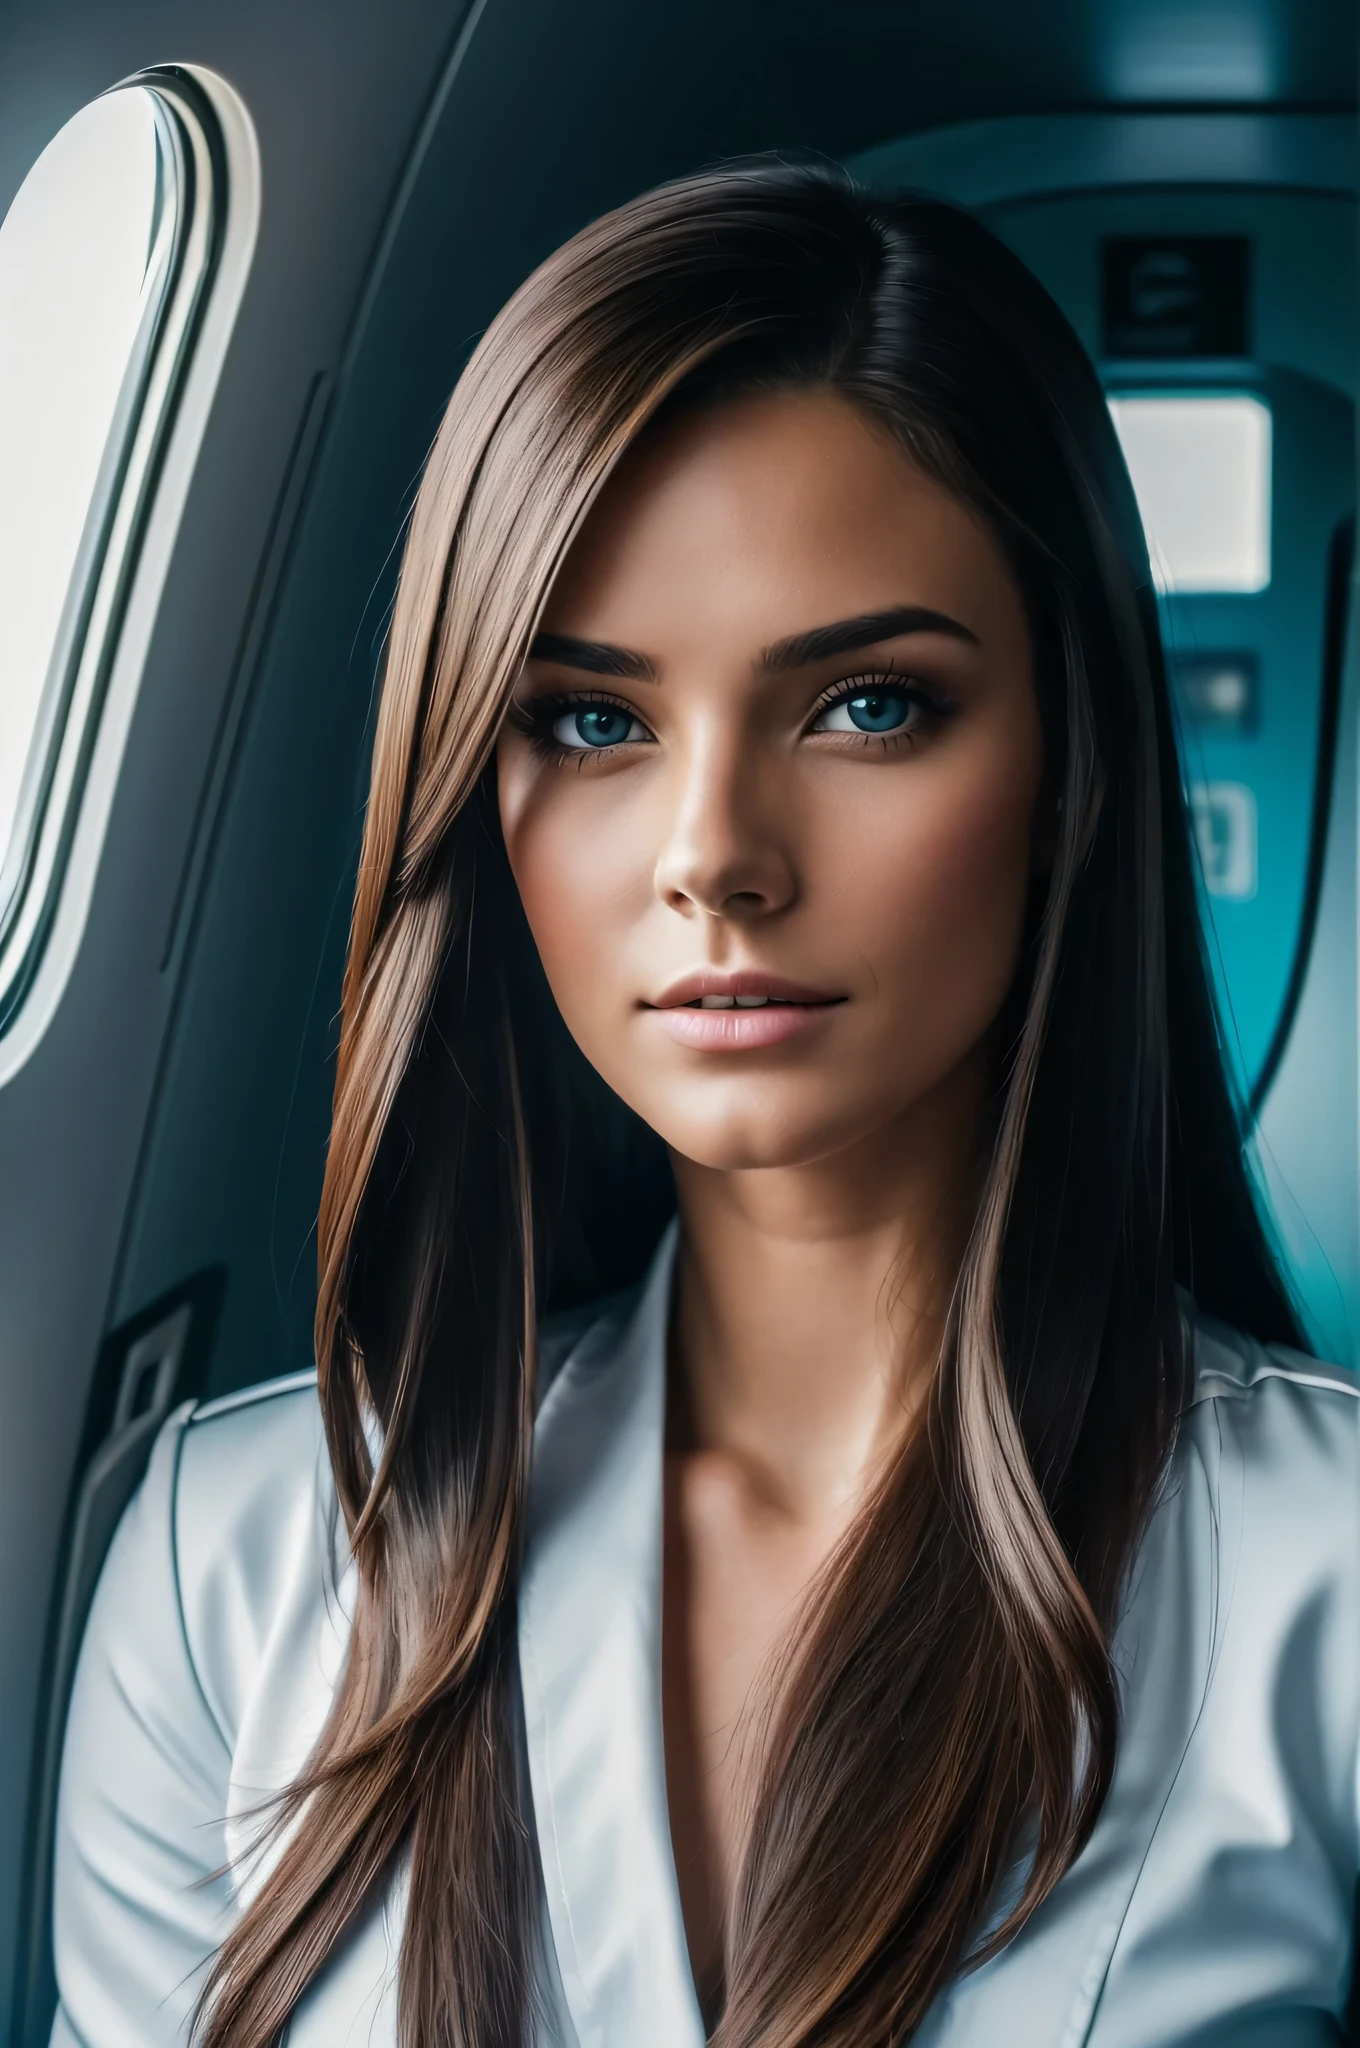 RAW portrait photo of 1 brunette woman with long hair, standing, in an aeroplane, wearing an airhostess uniform, cyberpunk neon lights lighting, profile image, russian supermodel, medium firm breasts, I am, reveals your body, transparentes, highy detailed, skin imperfections:1.1), detailed, specular illumination, dslr, ultra quality, sharp focus, grain of film, Sharp features, soft natural lighting, magic photography, natural lightting, Photo realism, ultra detali, 8K, best qualityer, Ultra Alto Nadaolution, (fotorrealisitic: 1.4), high resolution, detailed, raw-photo, sharp re, (8K, 4K, best qualityer, Cao Cao, Ultra Cao Cao nada:1.1), (Masterpiece artwork, realisitic, realisitic:1.1), Raw 50&#39;s style